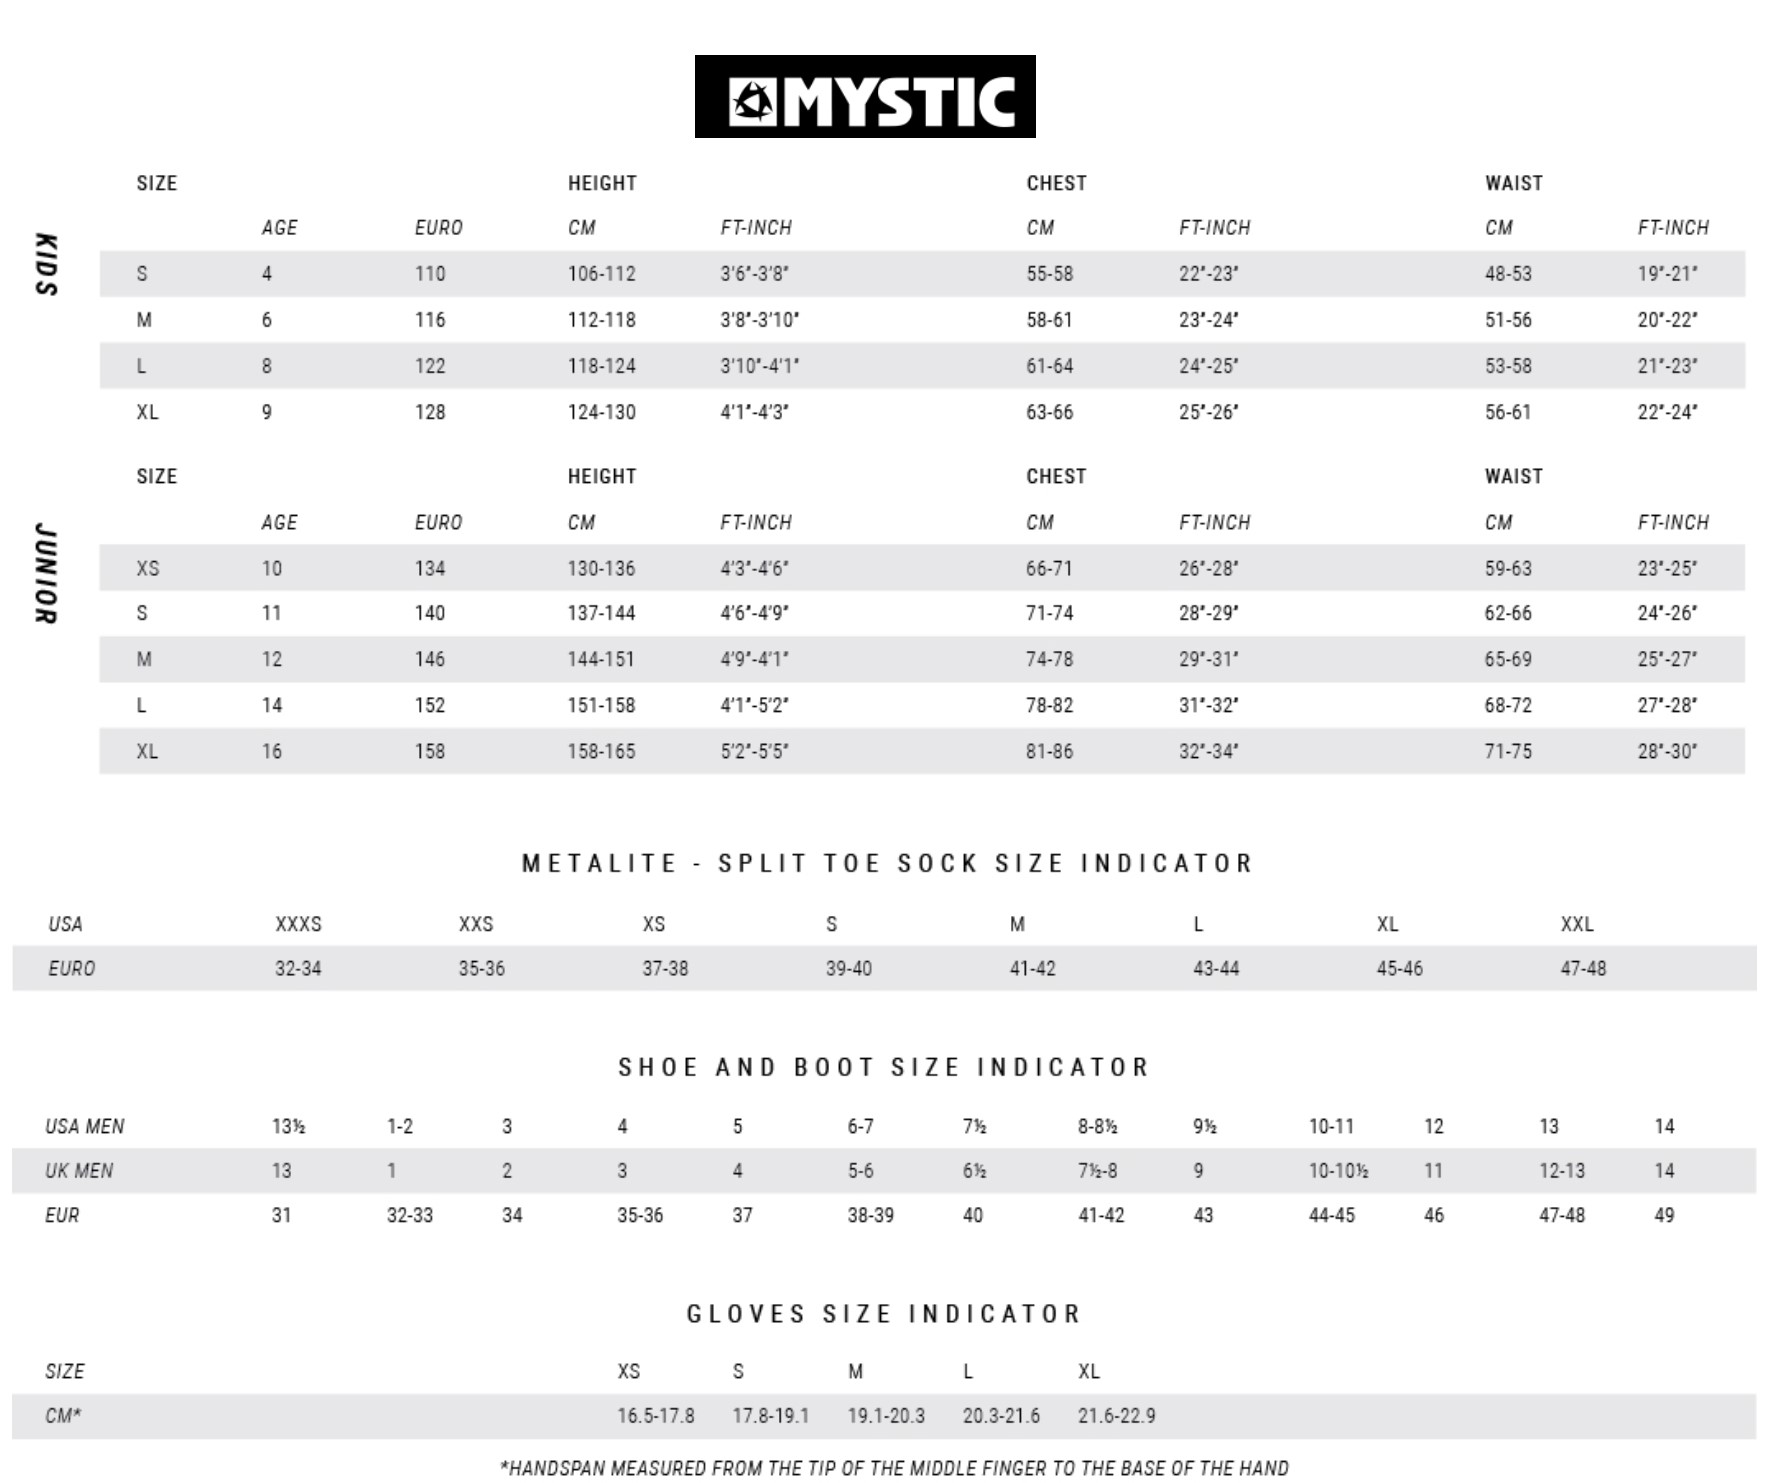 Wetsuit size guide for Mystic Junior and Kids